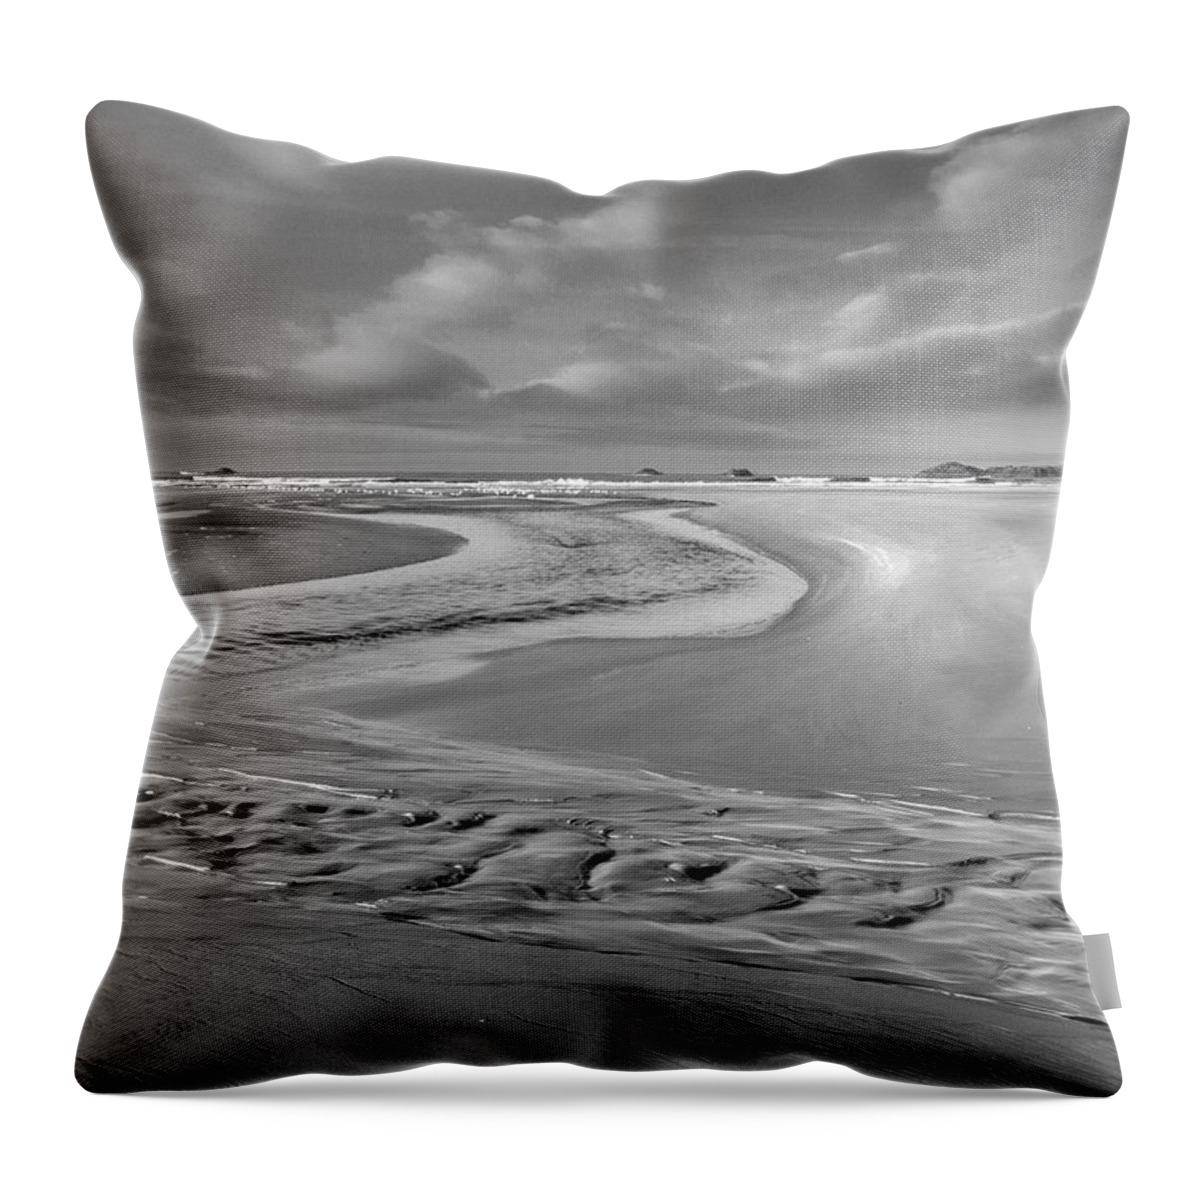 Disk1215 Throw Pillow featuring the photograph Comber Beach Pacific Rim National Park by Tim Fitzharris